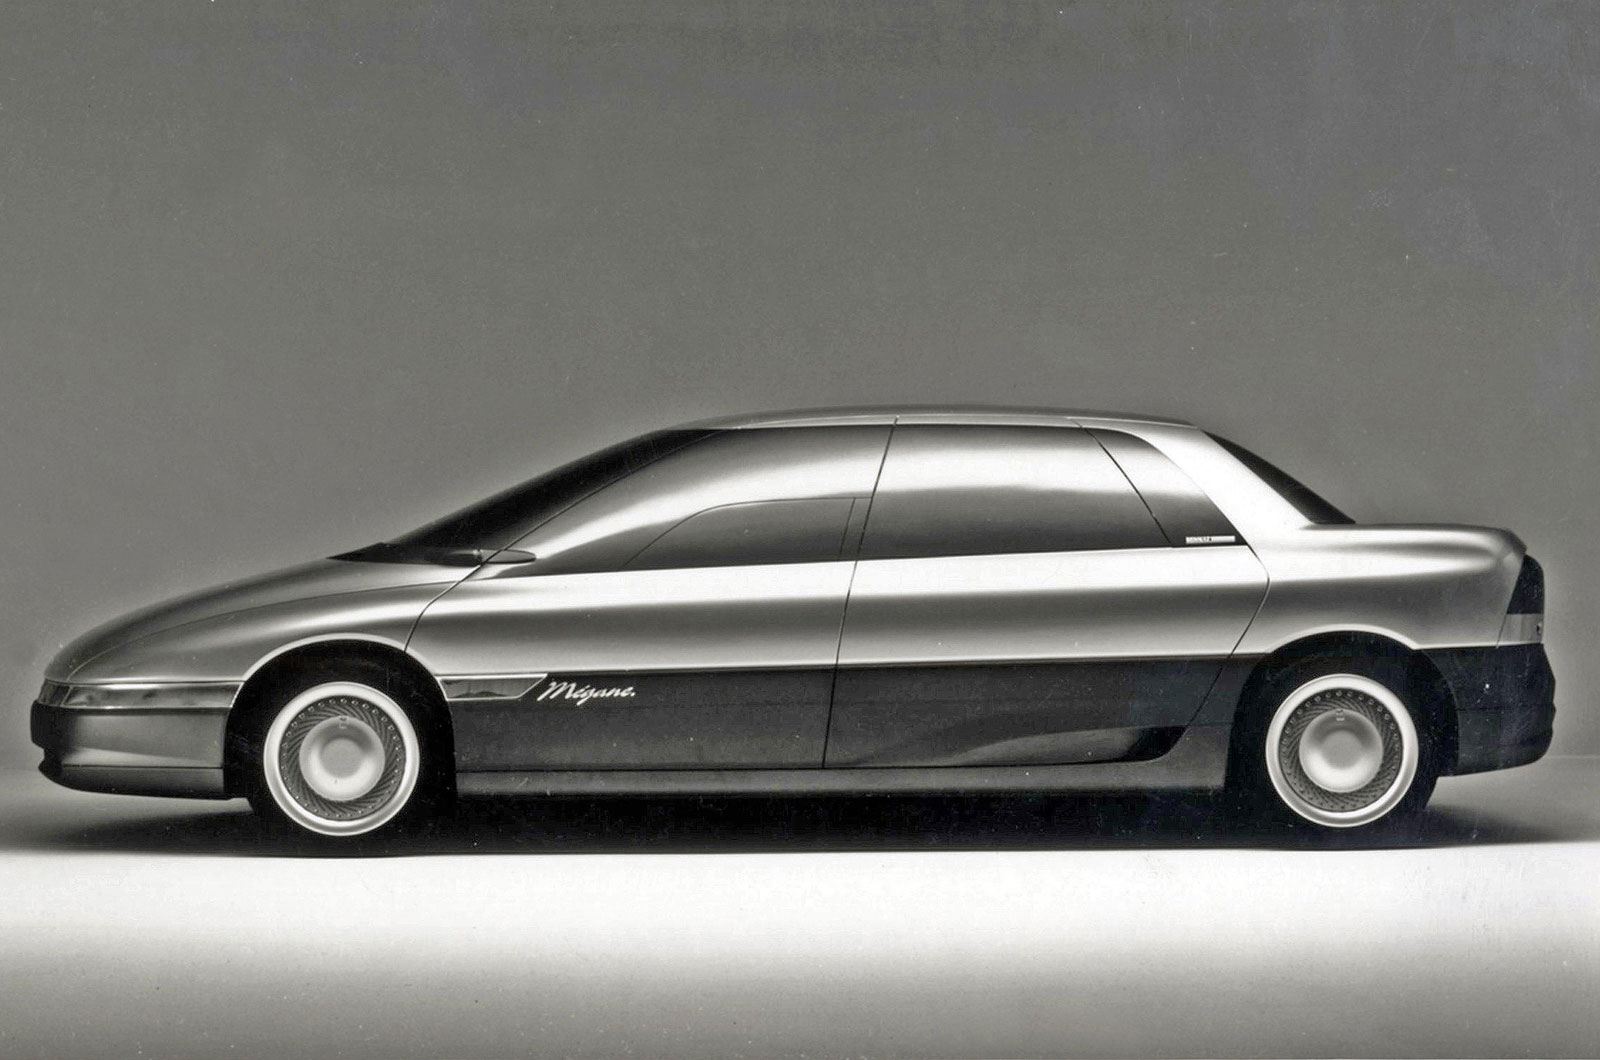 <p>Before the Megane production car arrived in 1995, the name was used for this luxurious limousine which was shorter than a Mercedes S-Class, but featured a longer wheelbase for maximum interior space. With a drag co-efficient of just 0.21, there were sliding doors for easier entry and exit, helped further by swivelling chairs.</p><p>A 3.0-liter V6 petrol engine powered all four wheels via an automatic transmission, while there was electronically controlled four-wheel steering and adaptive suspension.</p>